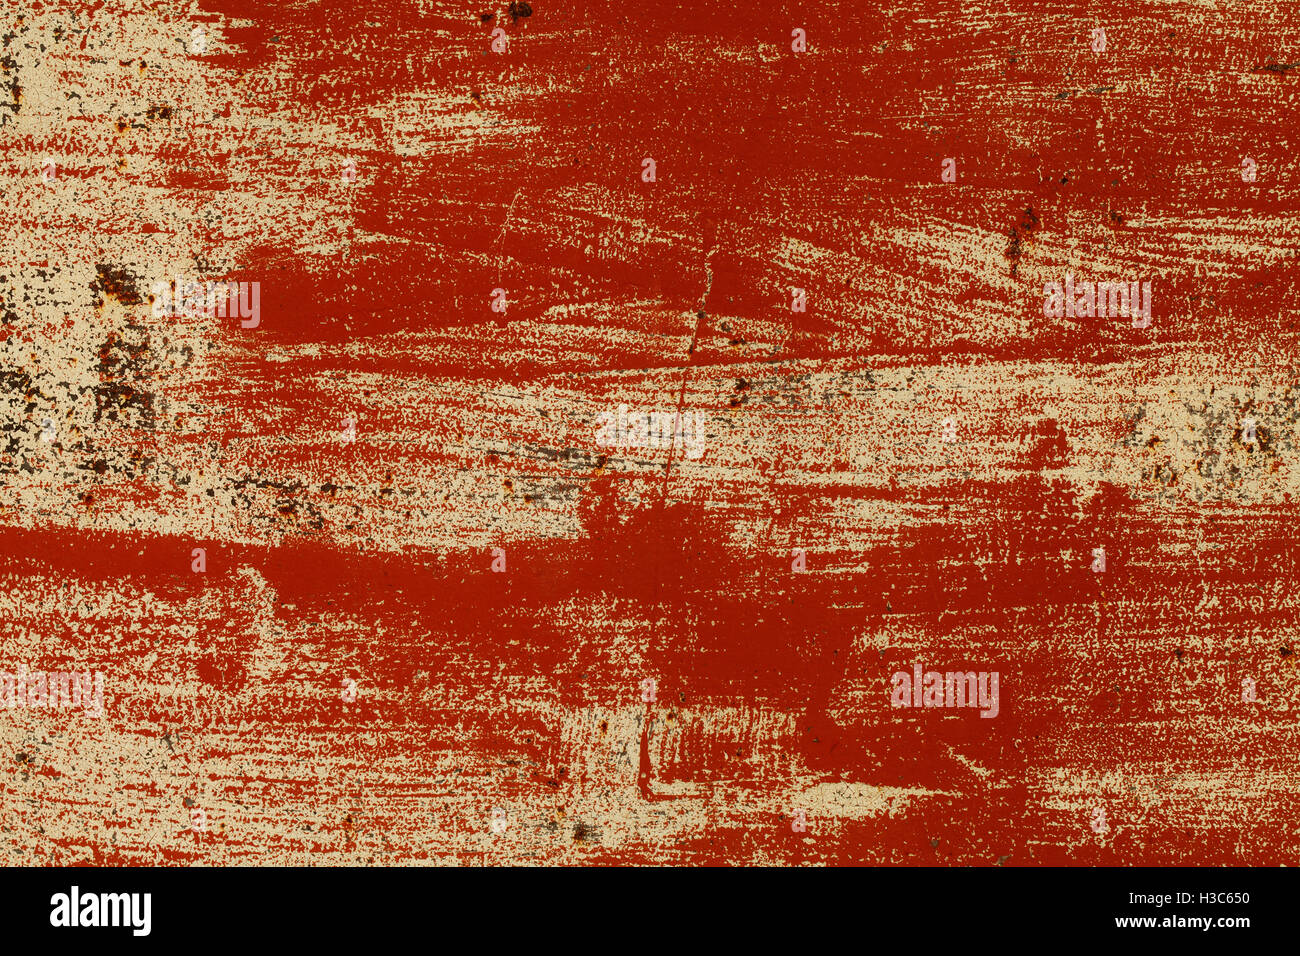 a grunge metal texture cracked red paint Stock Photo - Alamy